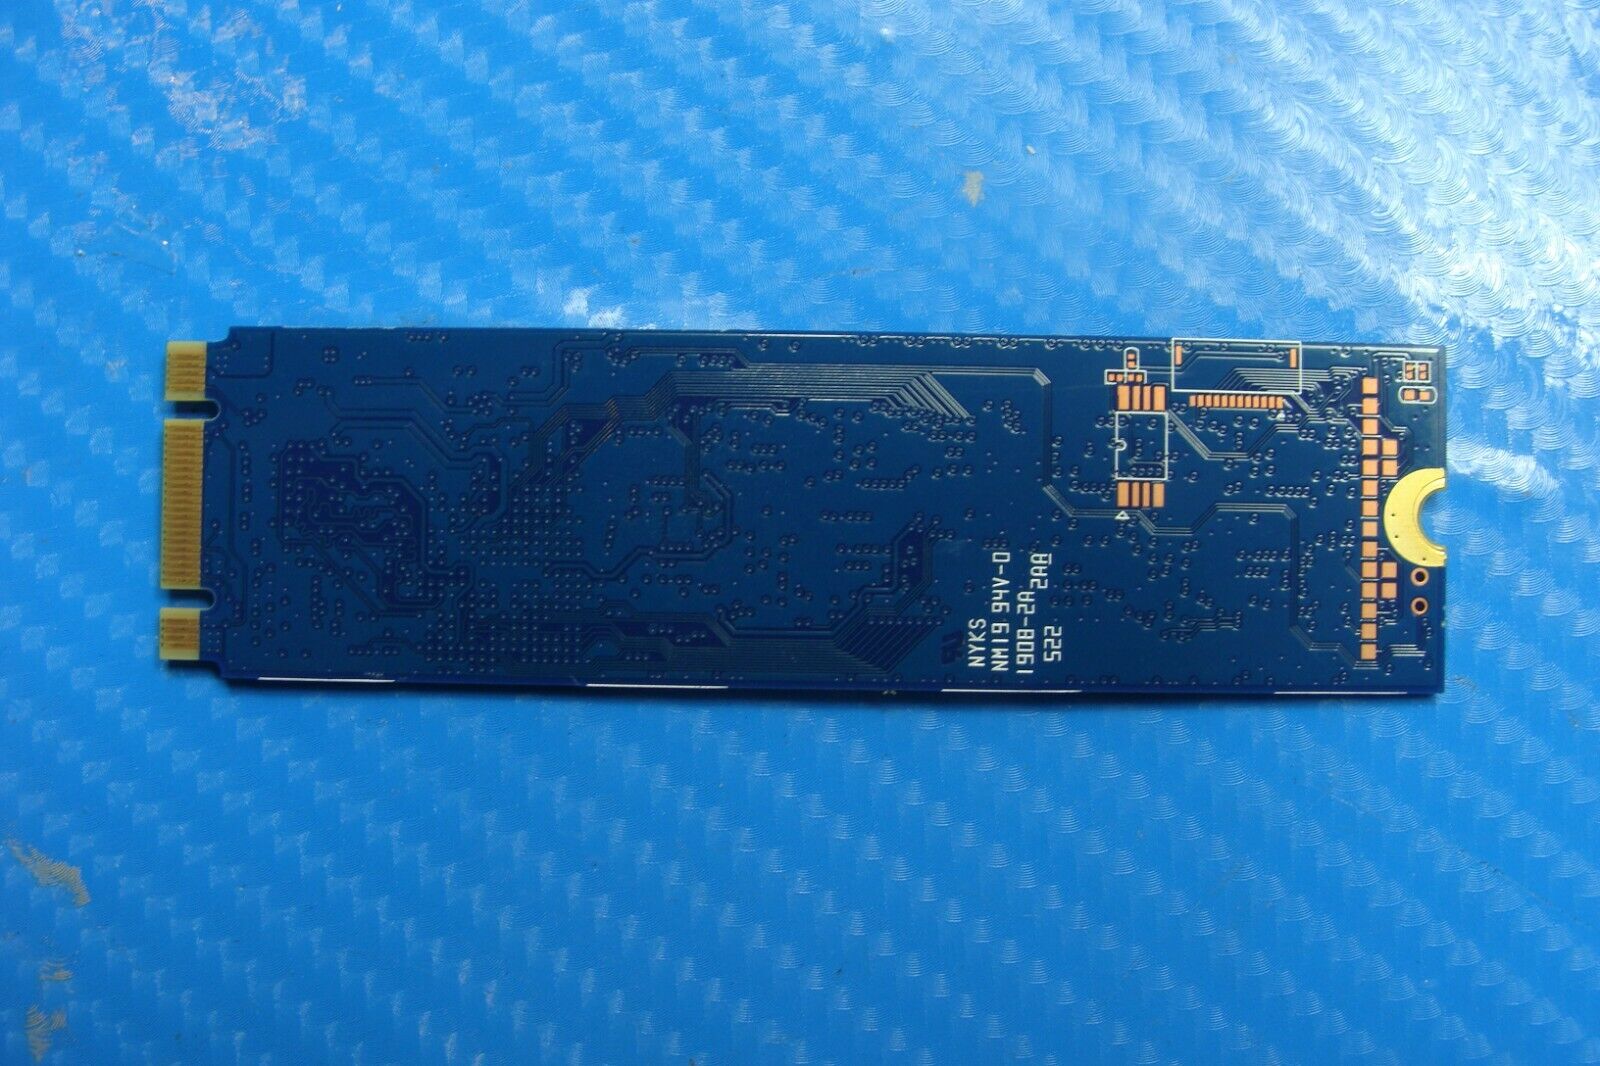 Acer A515-54-30BQ Kingston 128GB PCIe M.2 SSD Solid State Drive sns8154p3/128gj1 Tested Laptop Parts - Replacement Parts for Repairs